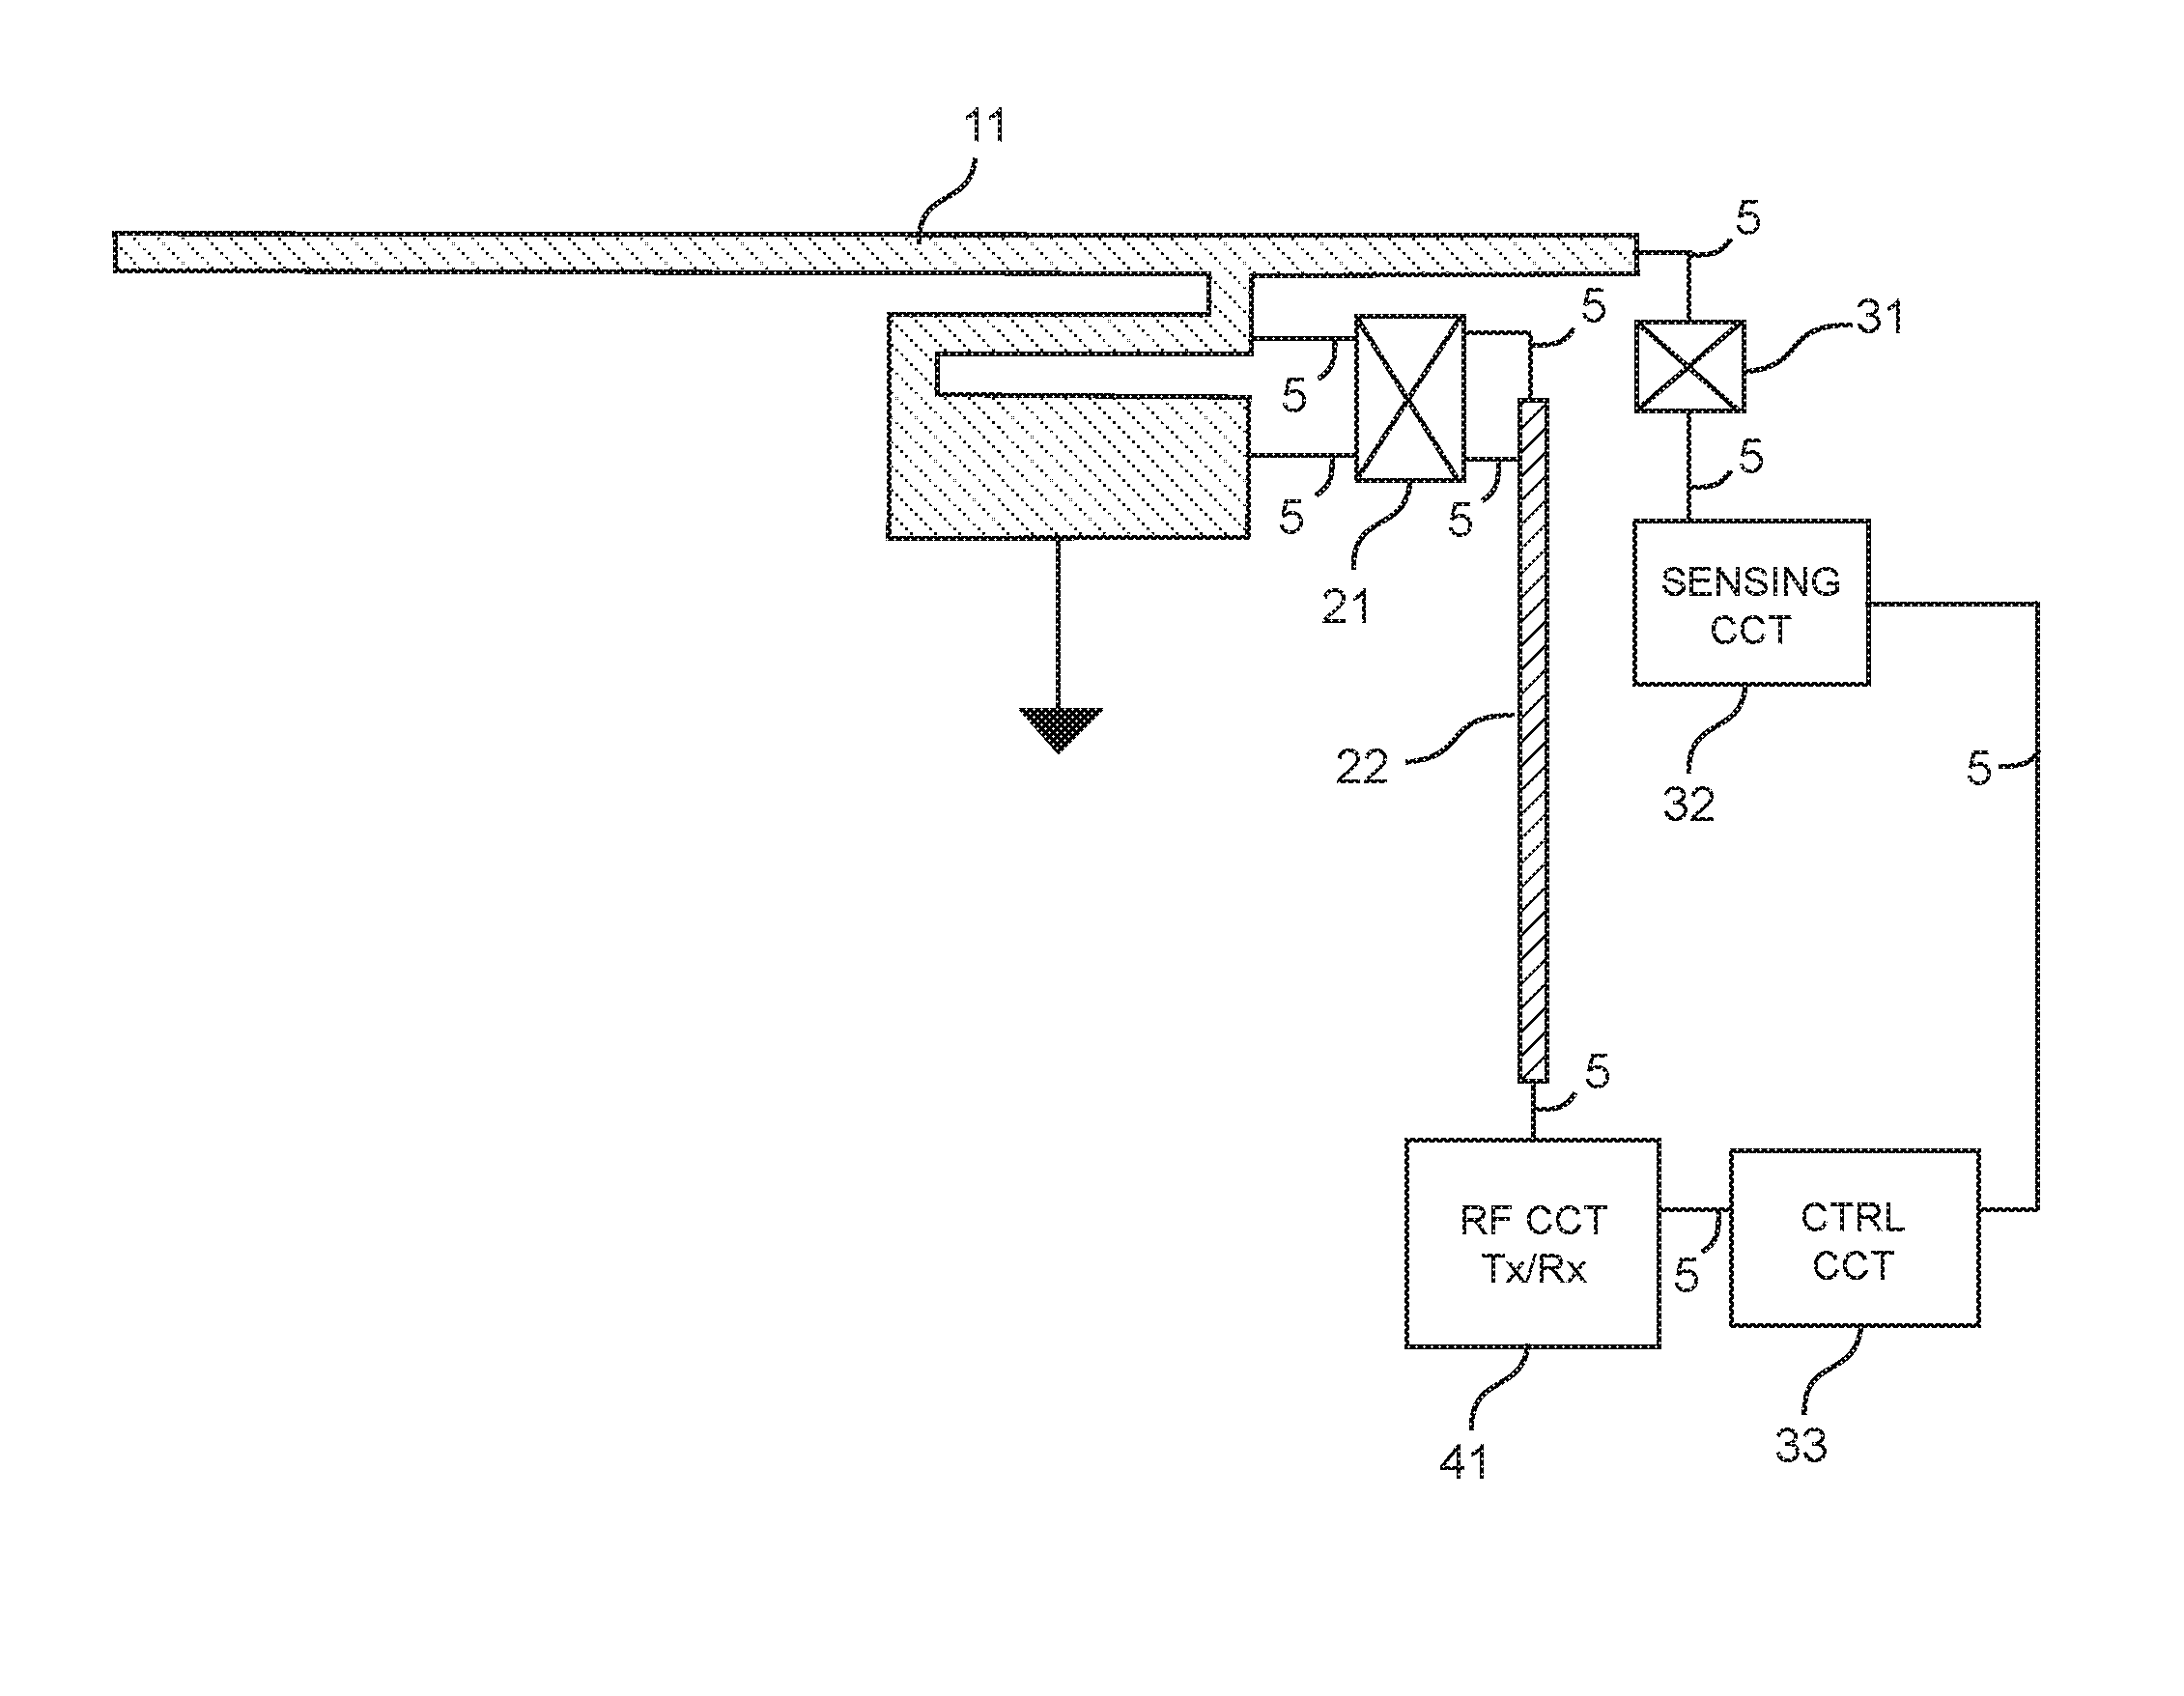 Hybrid antenna and integrated proximity sensor using a shared conductive structure